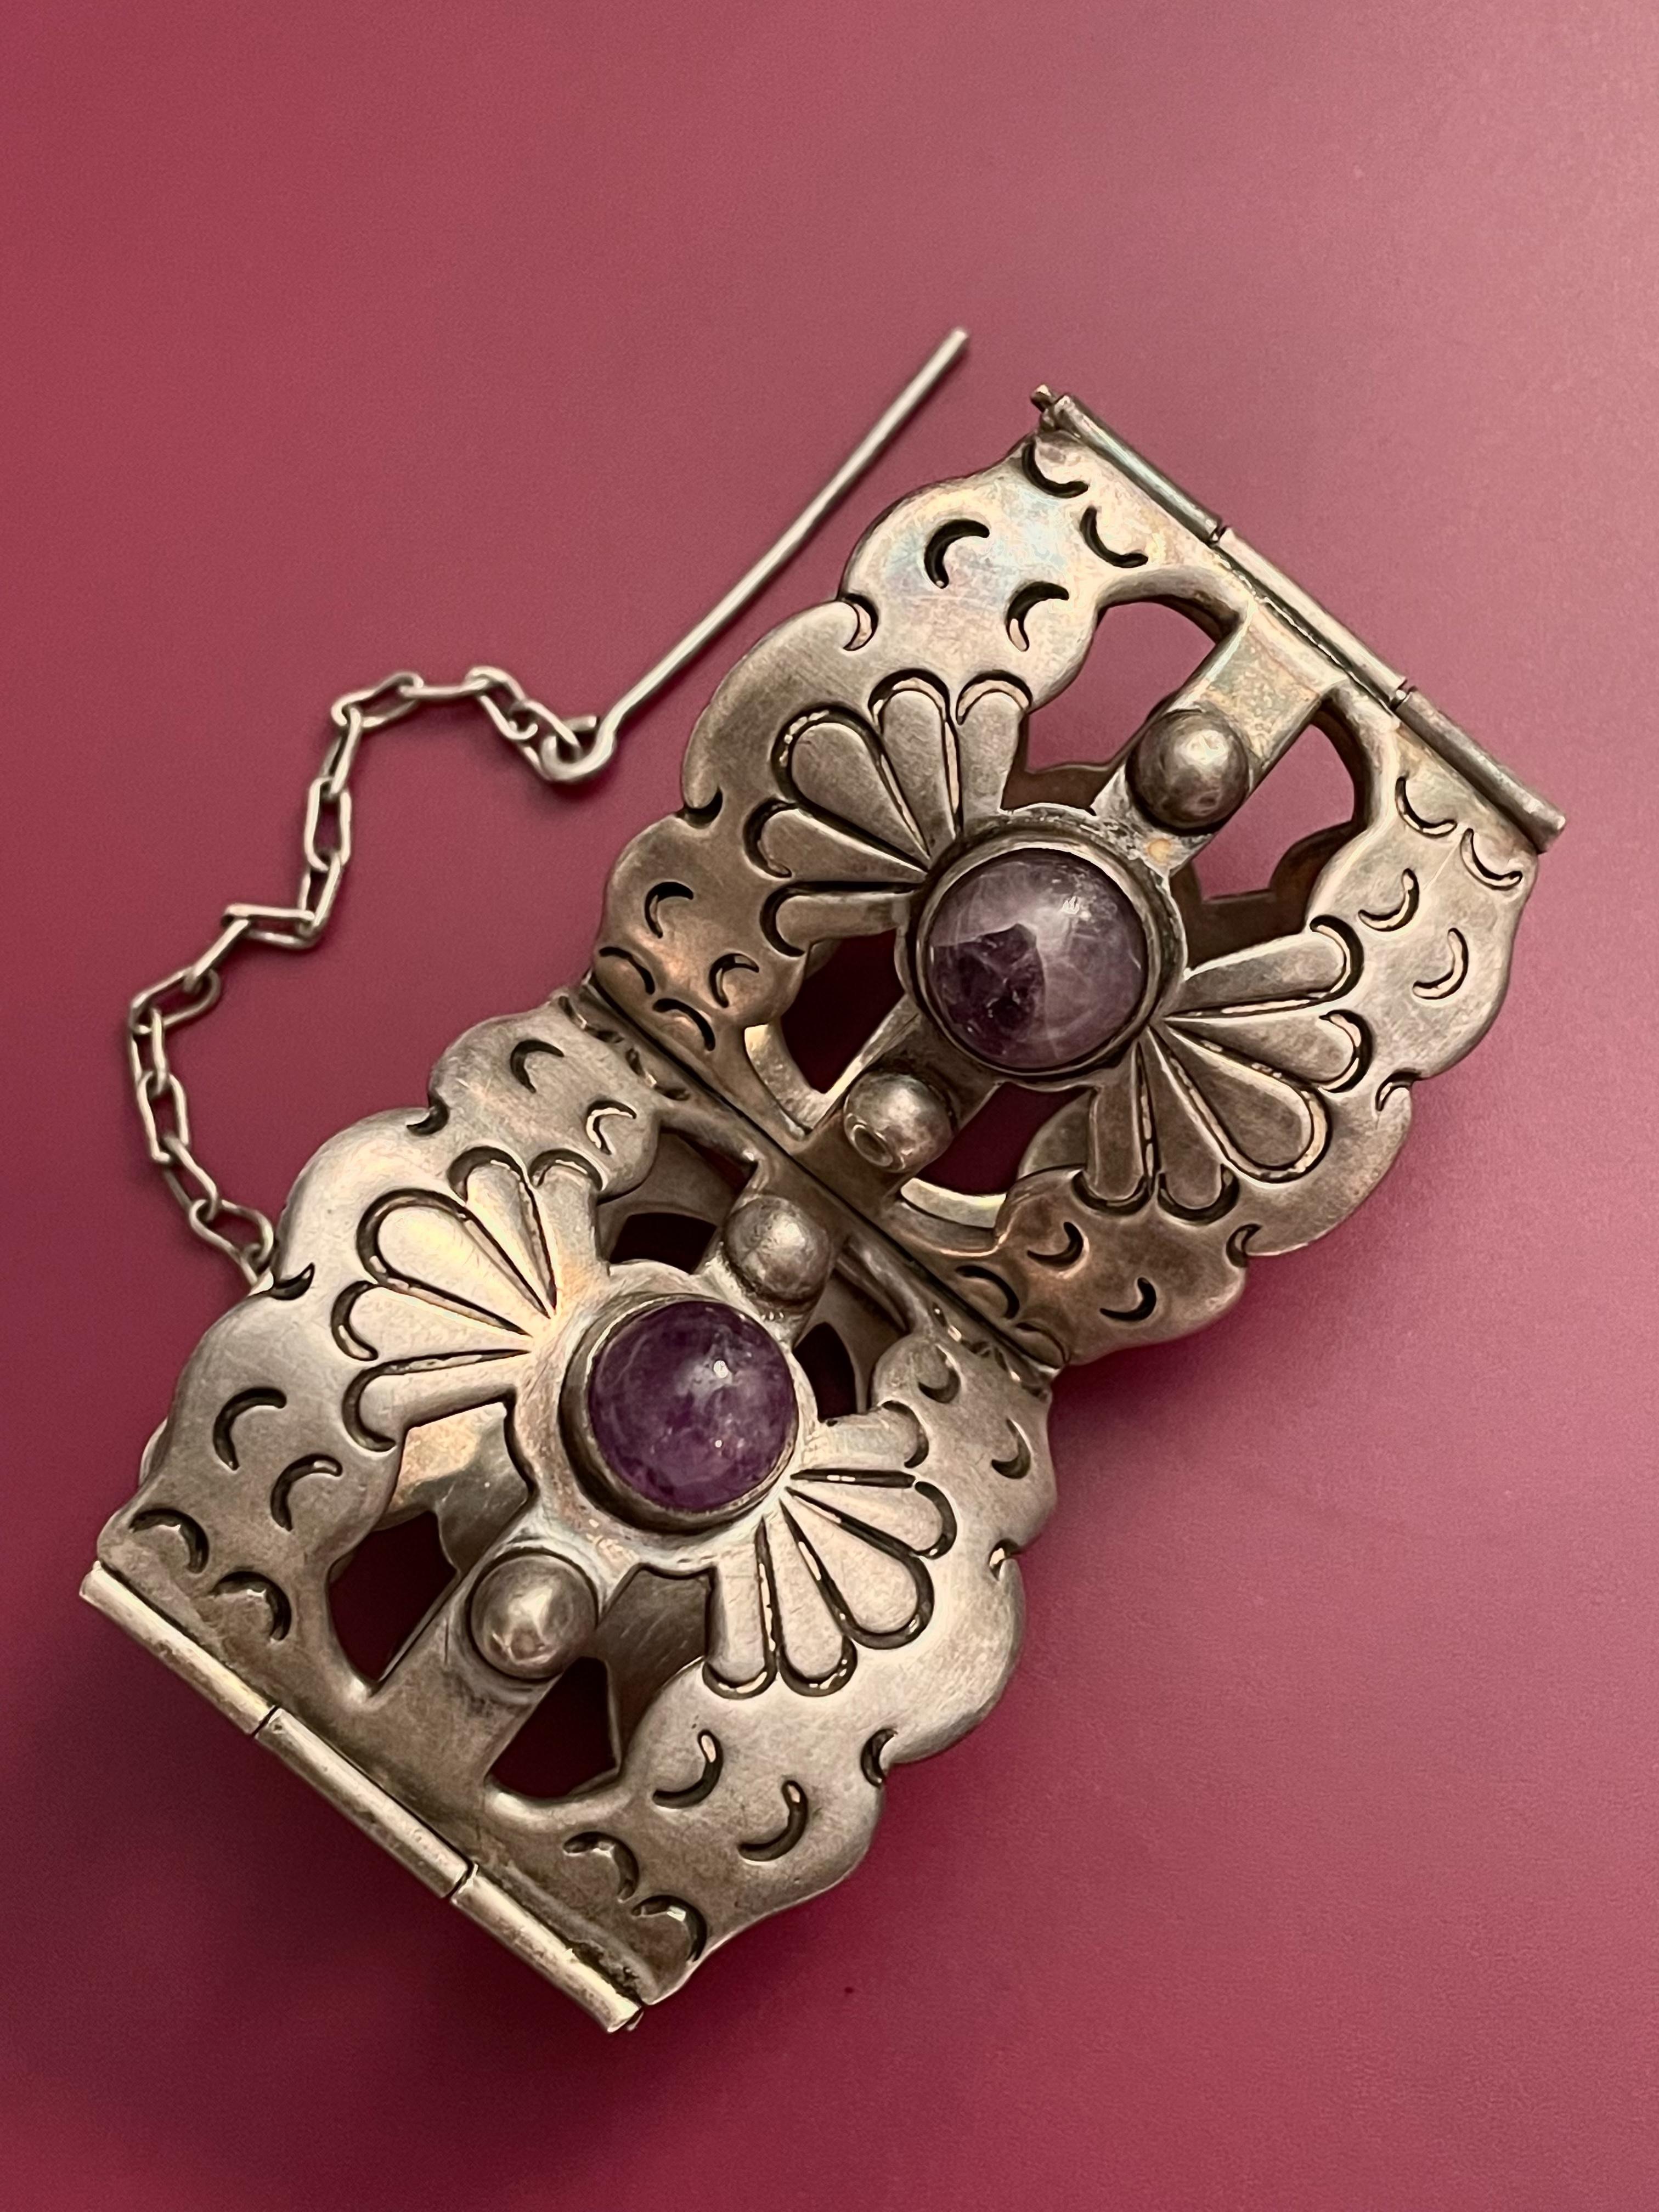 This vintage Taxco Sterling Silver bracelet features Amethyst cabochon stones on each link of the bracelt.

Stamped - TAXCO 980

Dimensions:  1 3/4